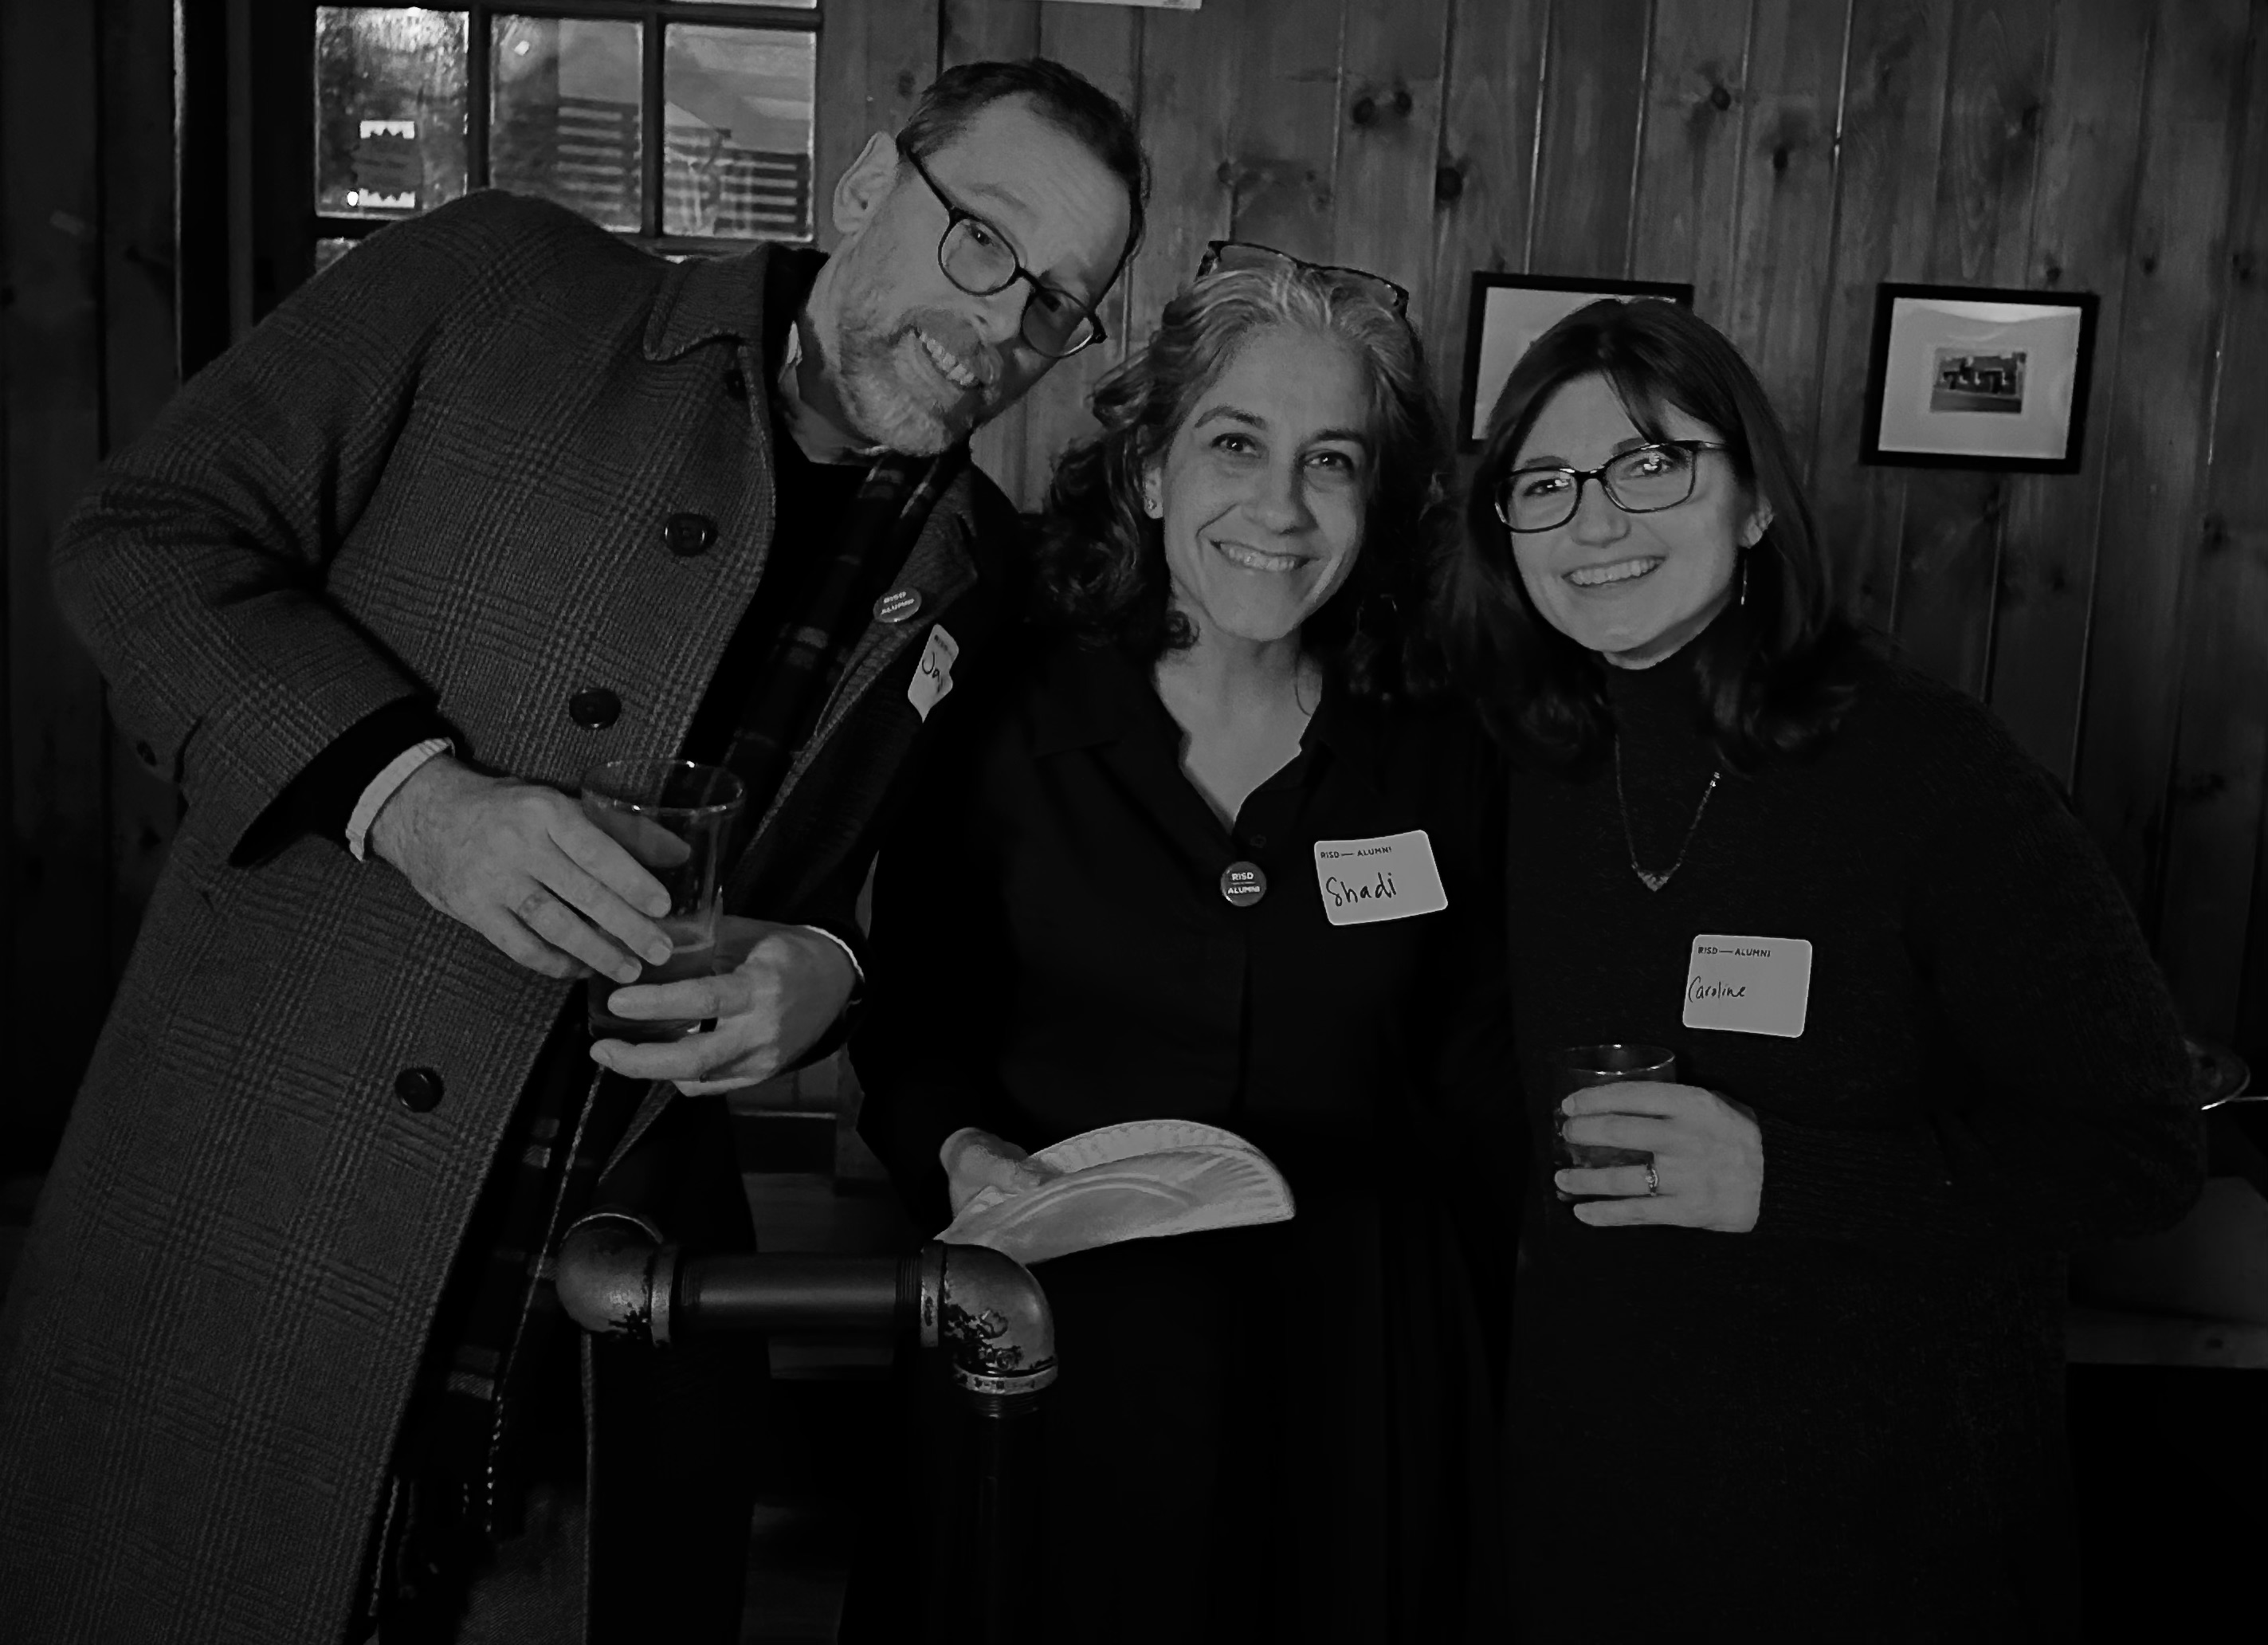 A black and white photo of people holding drinks and smiling at the camera